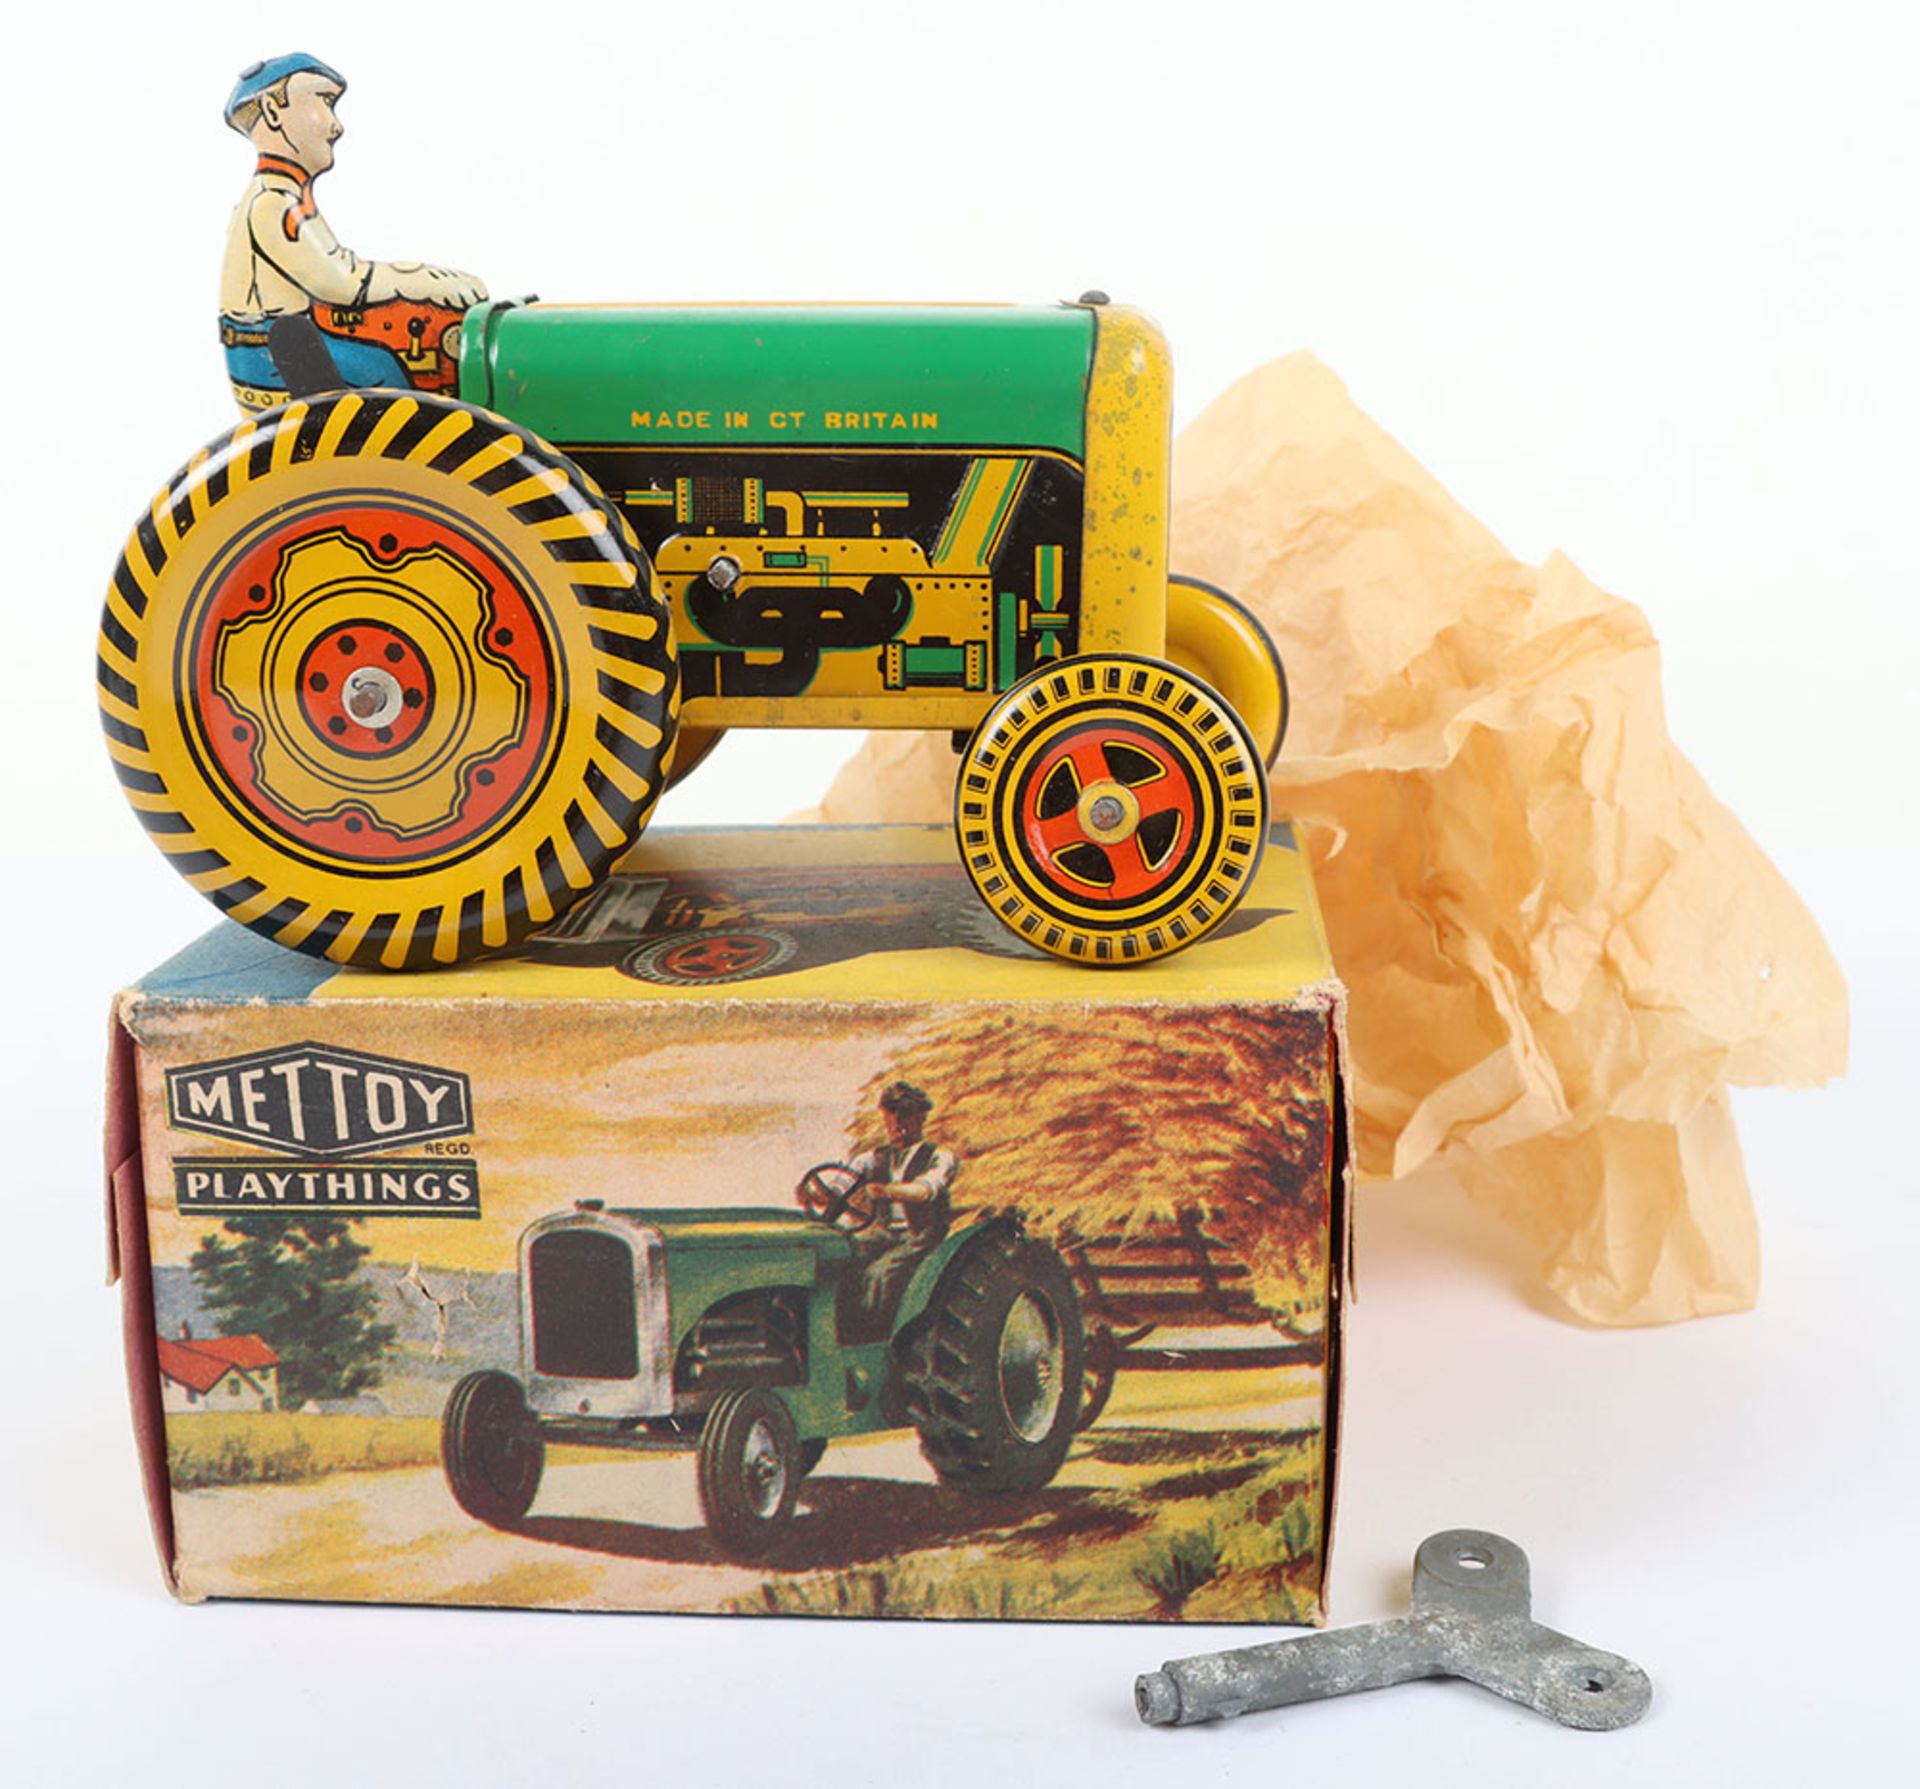 Mettoy Playthings Tinplate Mechanical Farm Tractor